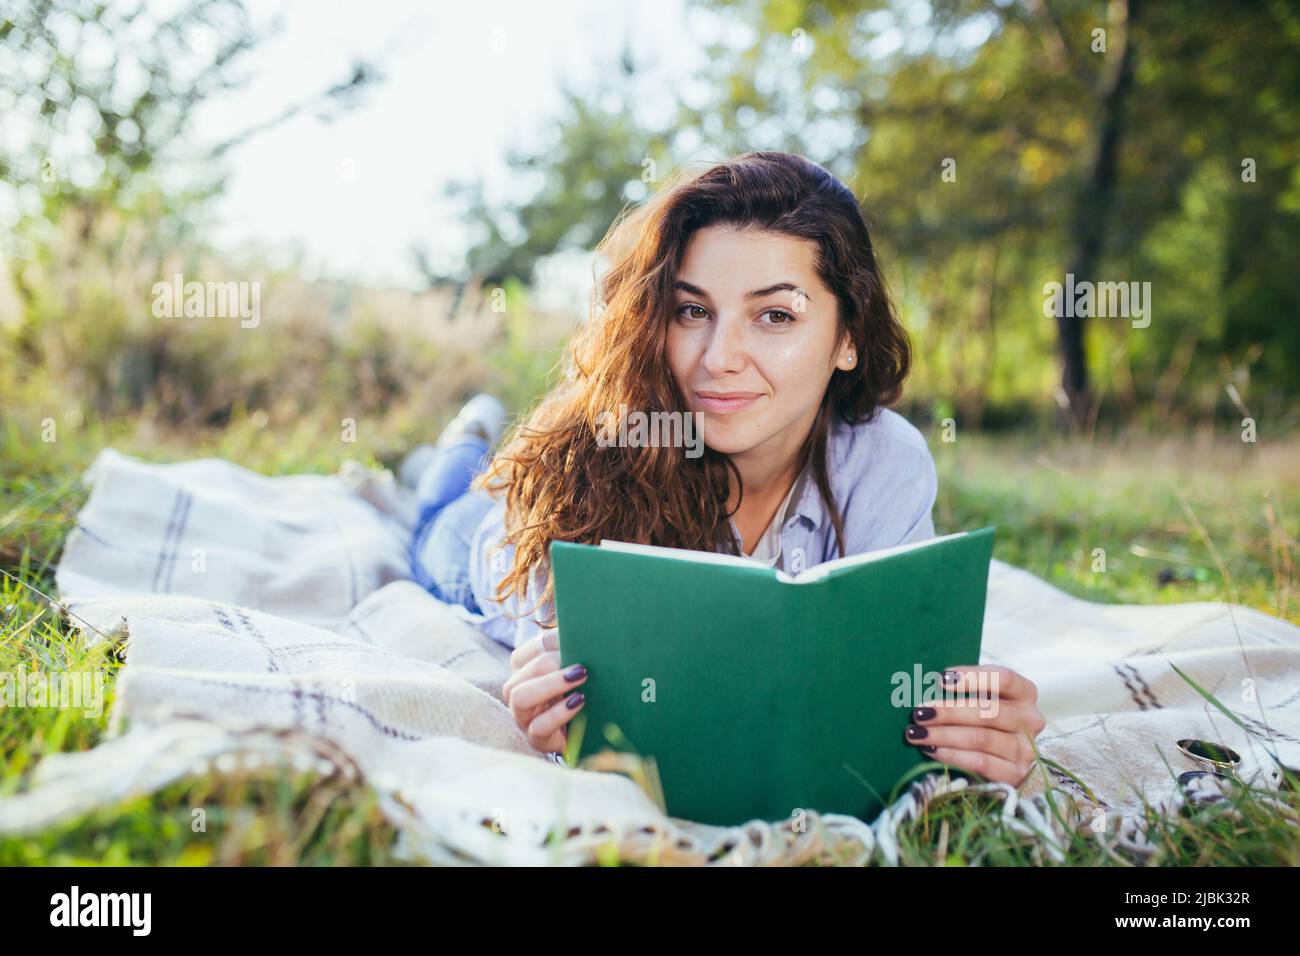 Beautiful young student girl reads a book, studies, lying on the grass in nature Stock Photo